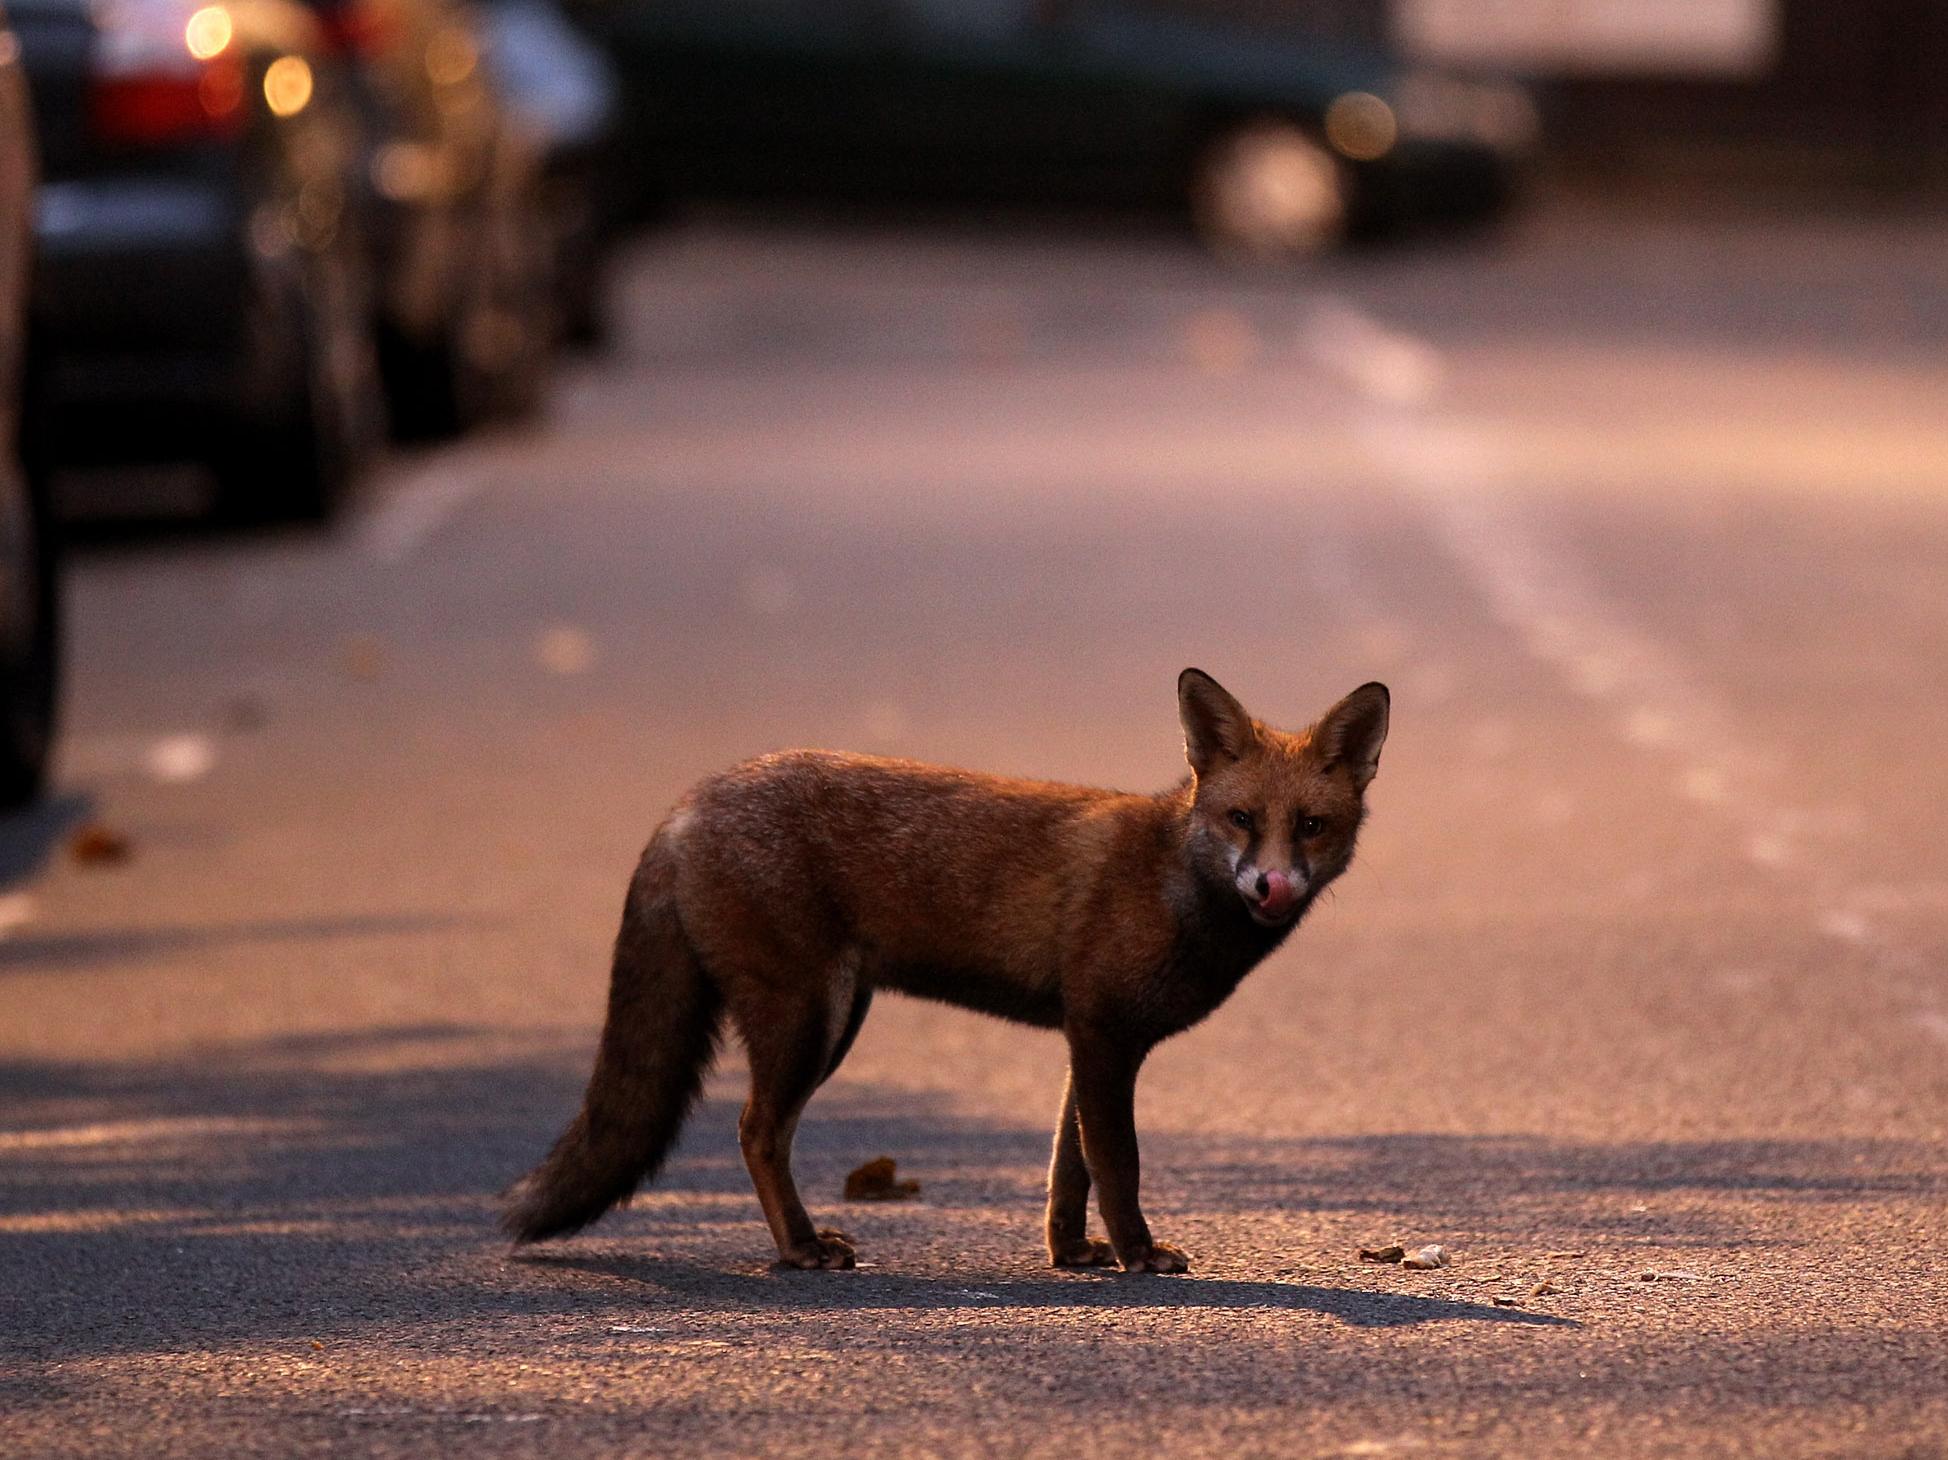 Urban foxes are growing more 'similar to domesticated dogs', research finds